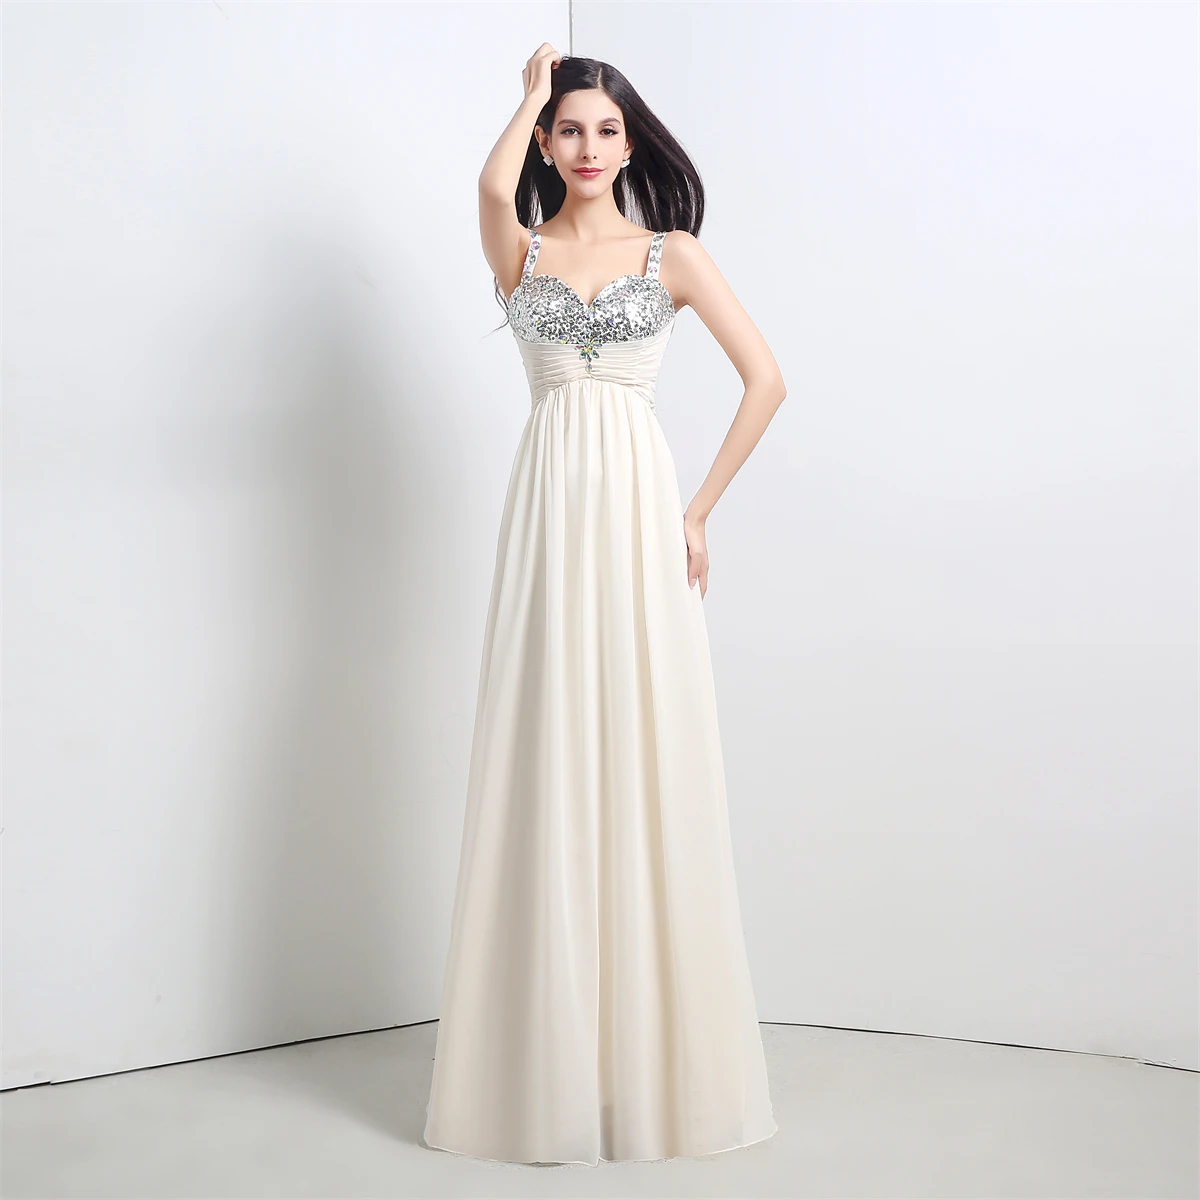 

Noble Spaghetti Strap Prom Sweetheart Gown A Line Club Sleeveless Cocktail Backless Formal Party Lady 2023 Women Evening Dress